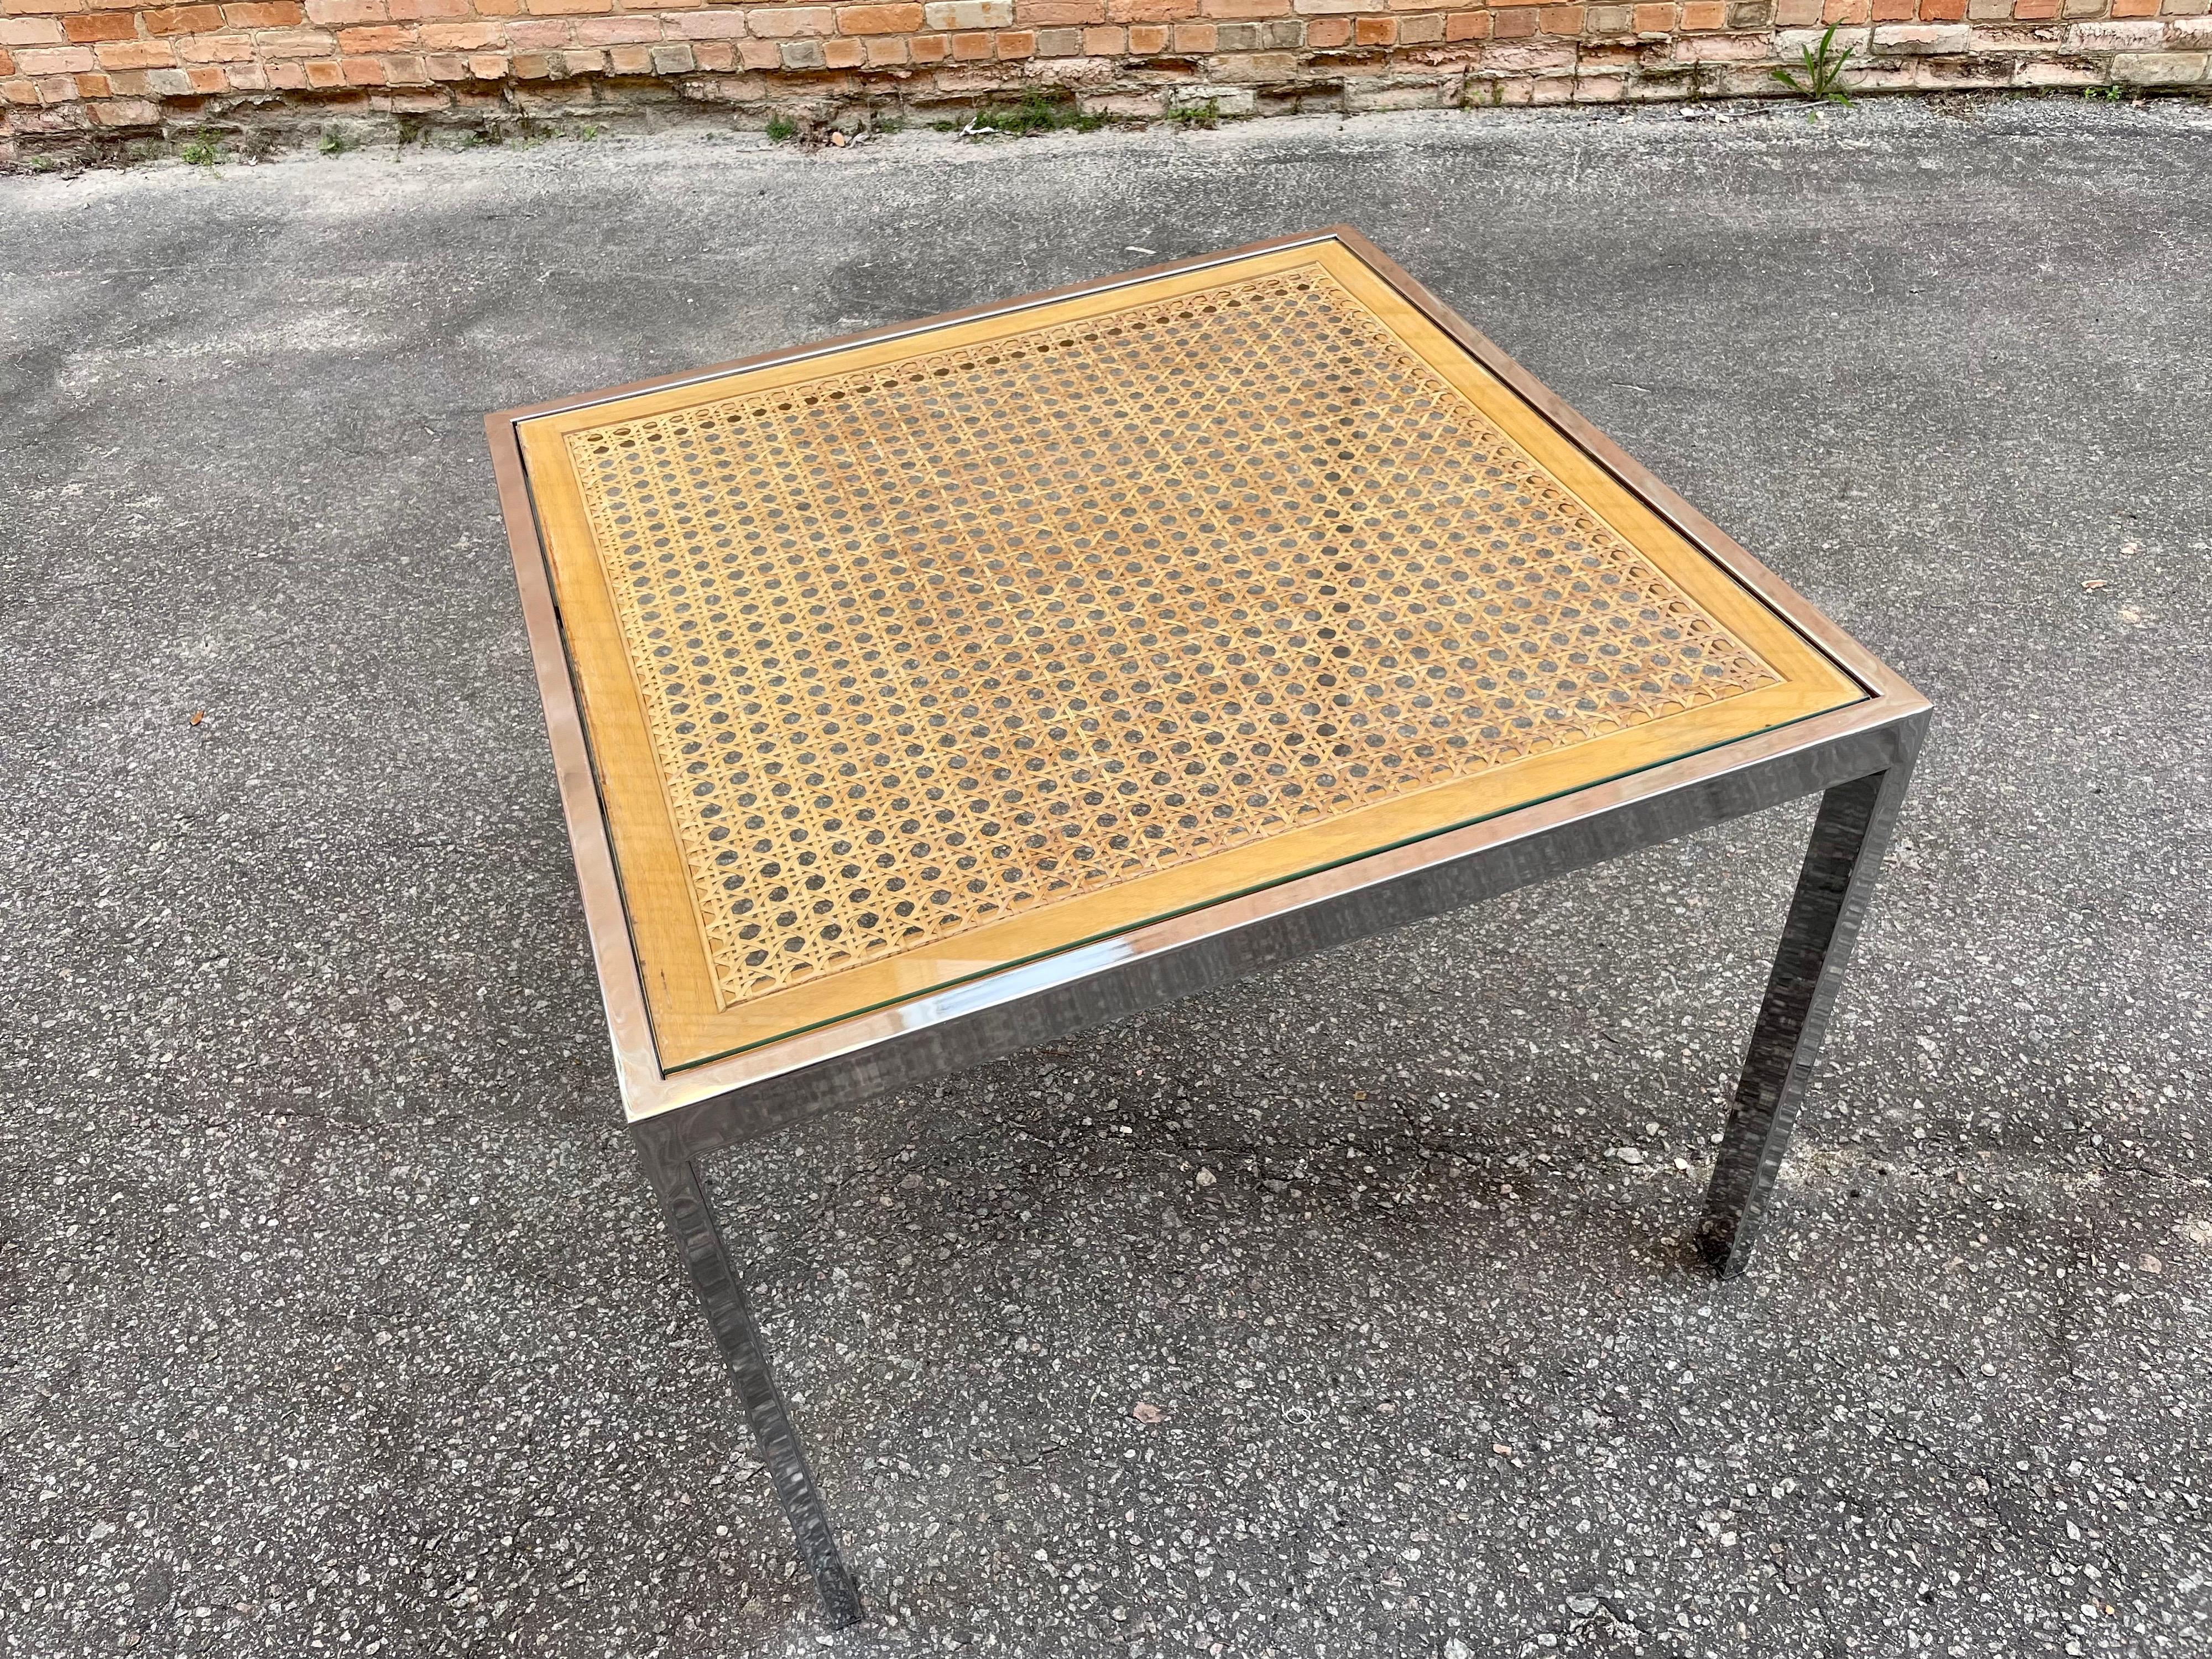 A table well suited as a breakfast, kitchen, or game table. A perfect size dining table, too, for a small urban apartment. This piece simultaneously strikes both warm and modern cords. Beautifully produced by Design Institute America, and well